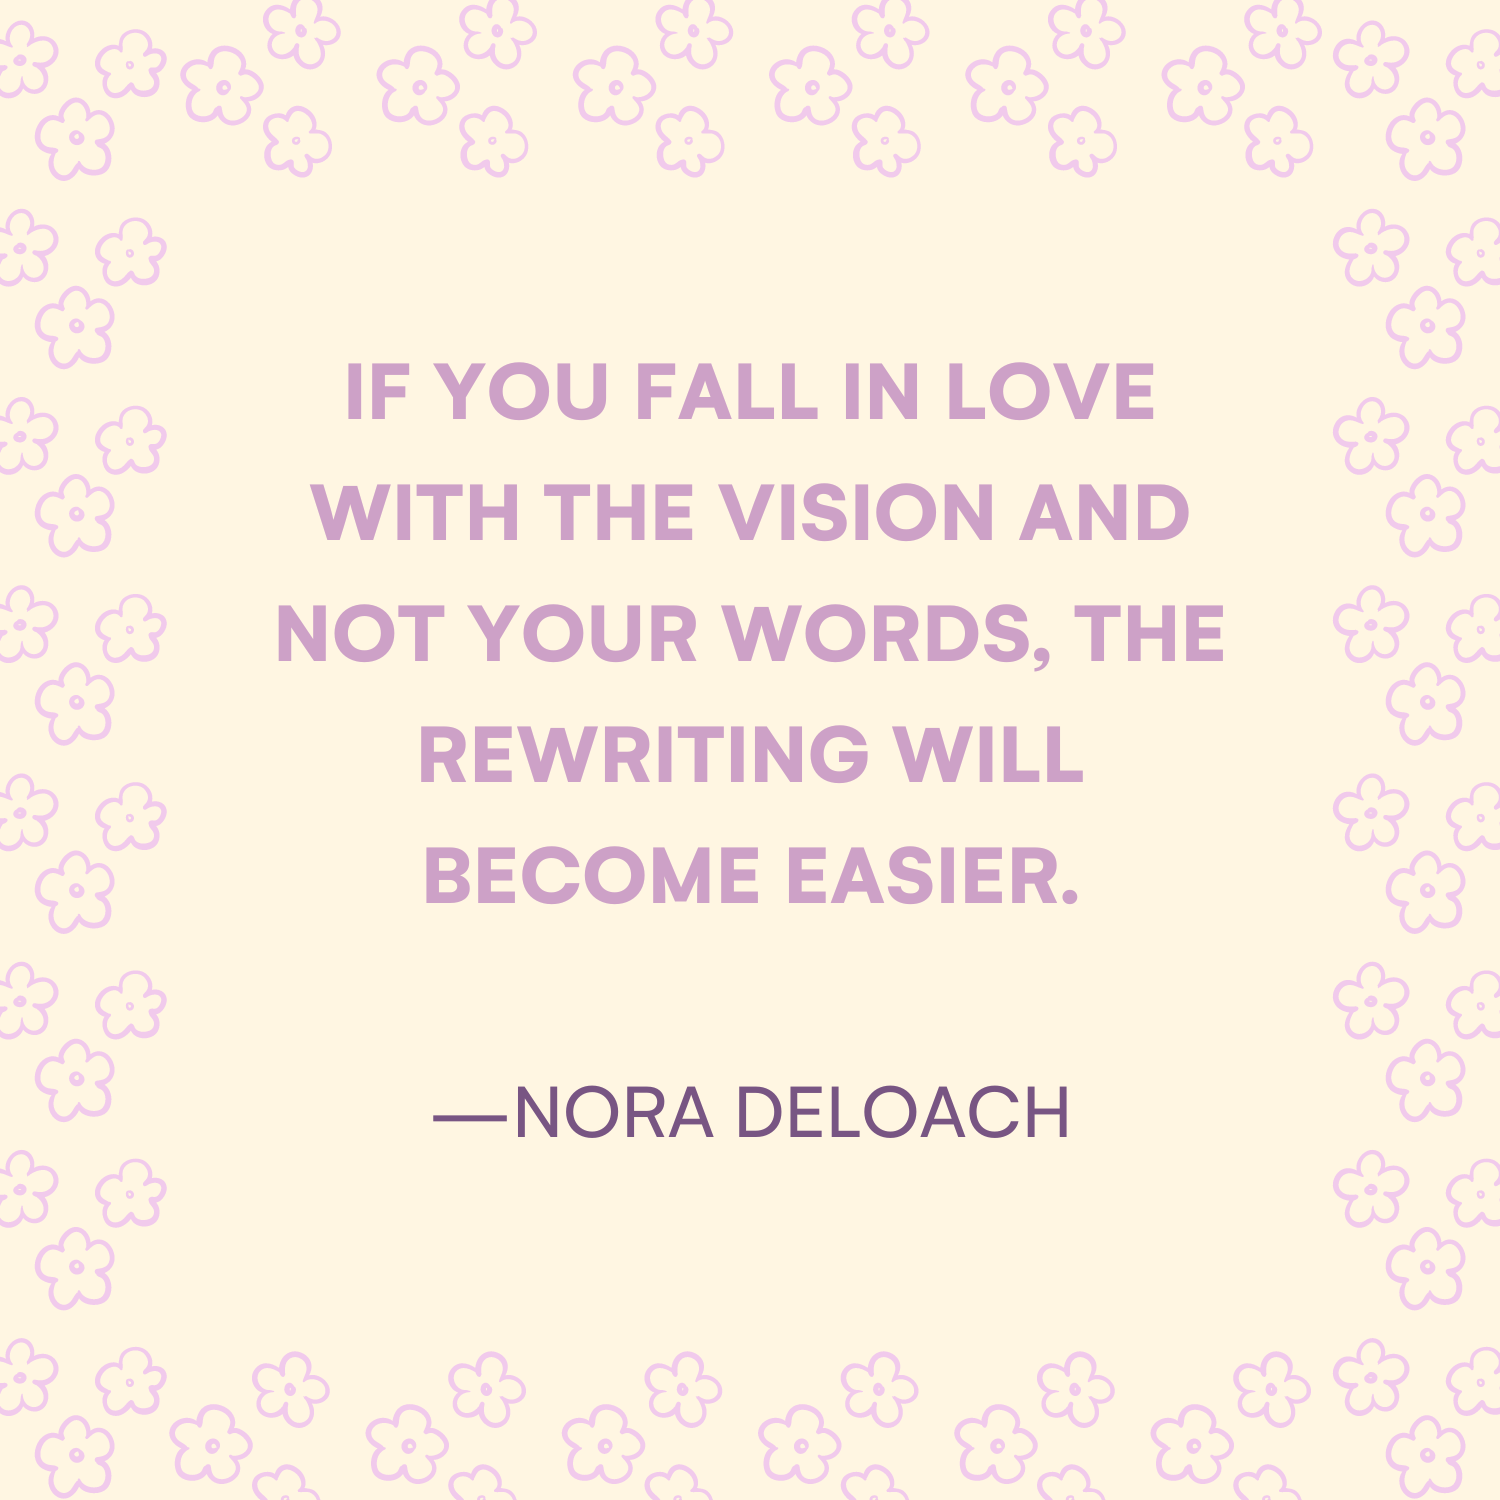 <p>"If you fall in love with the vision and not your words, the rewriting will become easier." —Nora DeLoach </p>